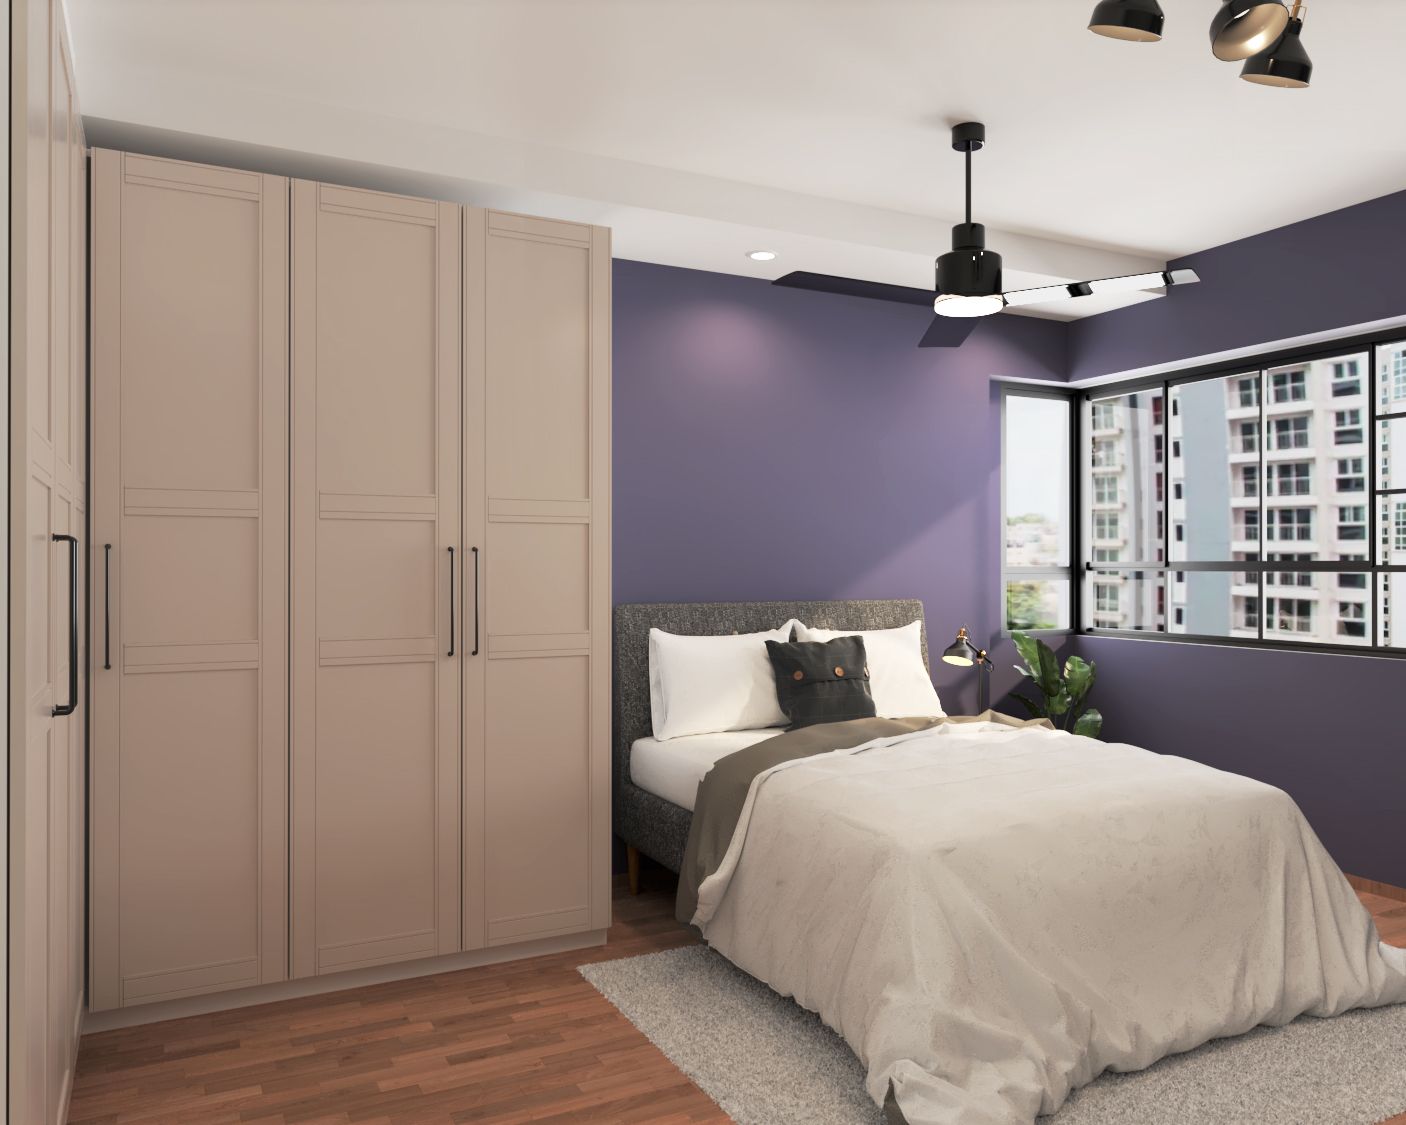 Contemporary Master Bedroom Design With L-Shaped Beige Swing Wardrobe And Purple Accent Wall